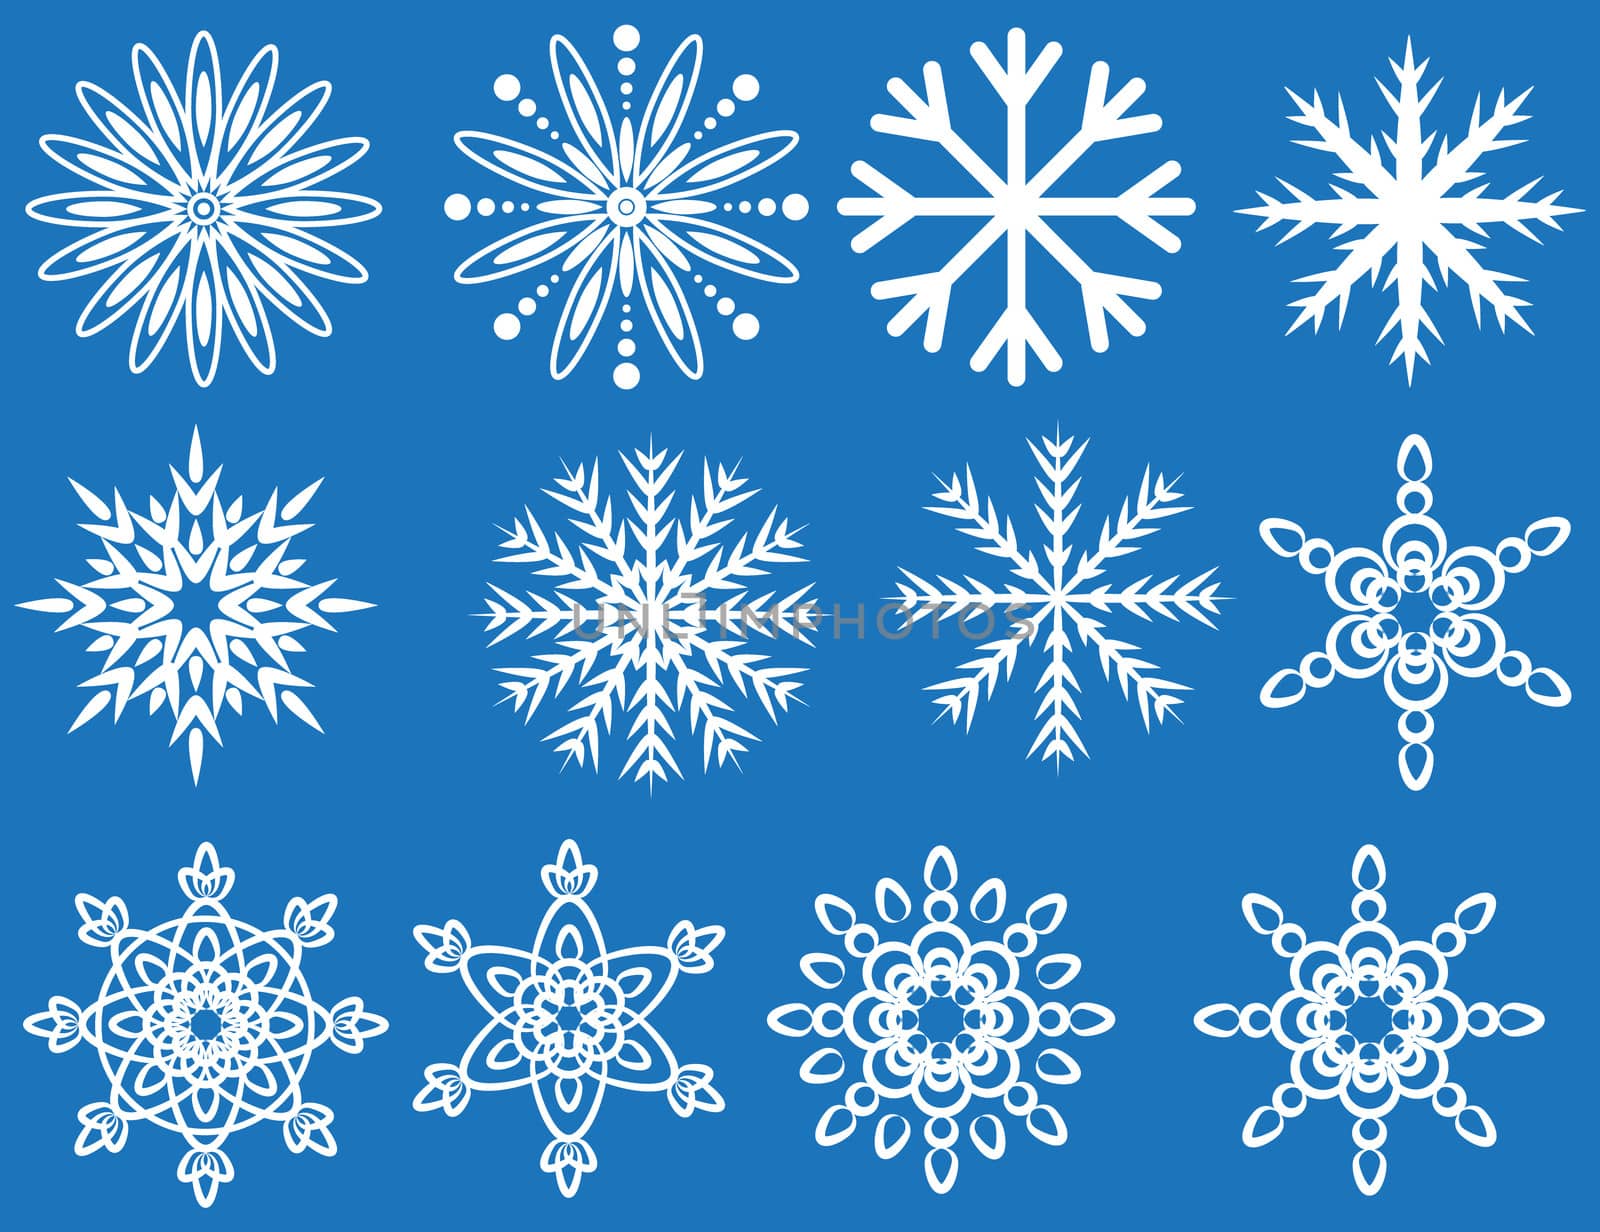 collection of decorative white snowflakes on blue background vector